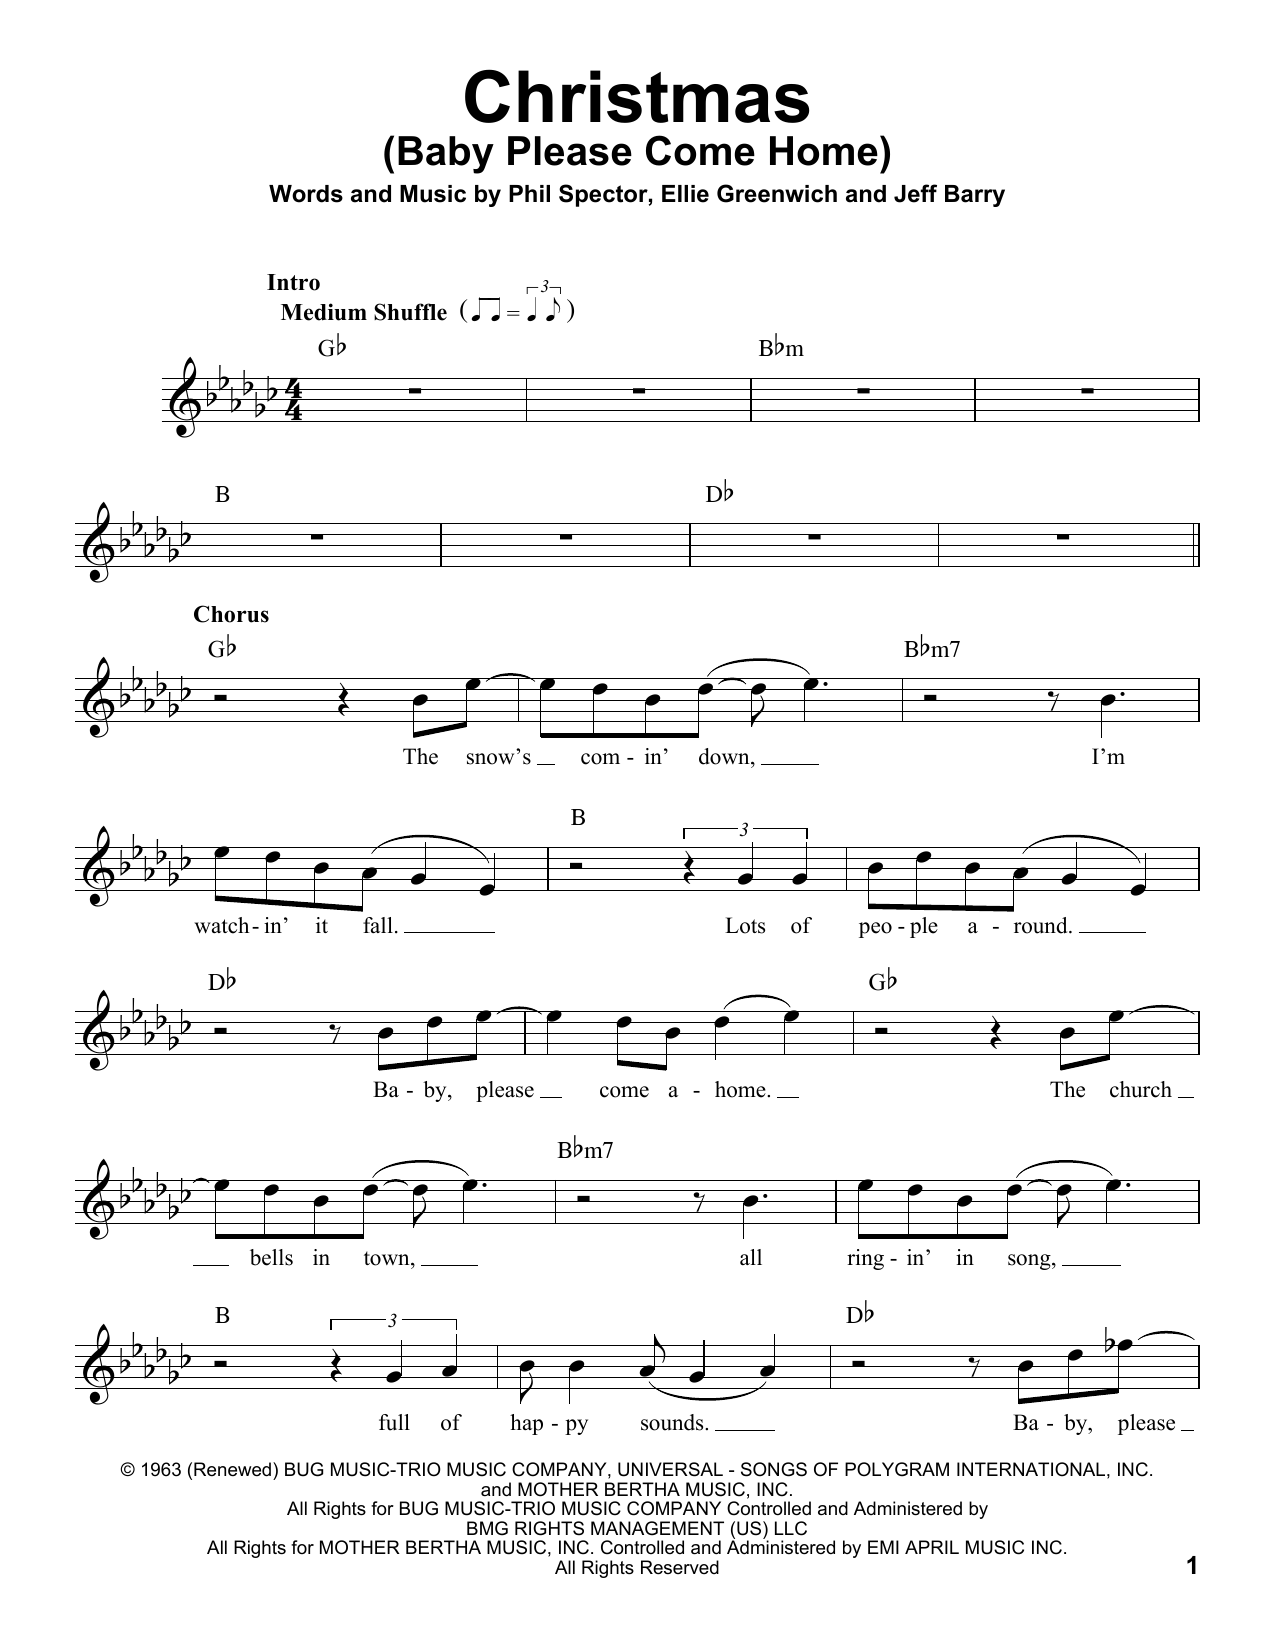 Michael Bublé Christmas (Baby Please Come Home) sheet music notes and chords. Download Printable PDF.